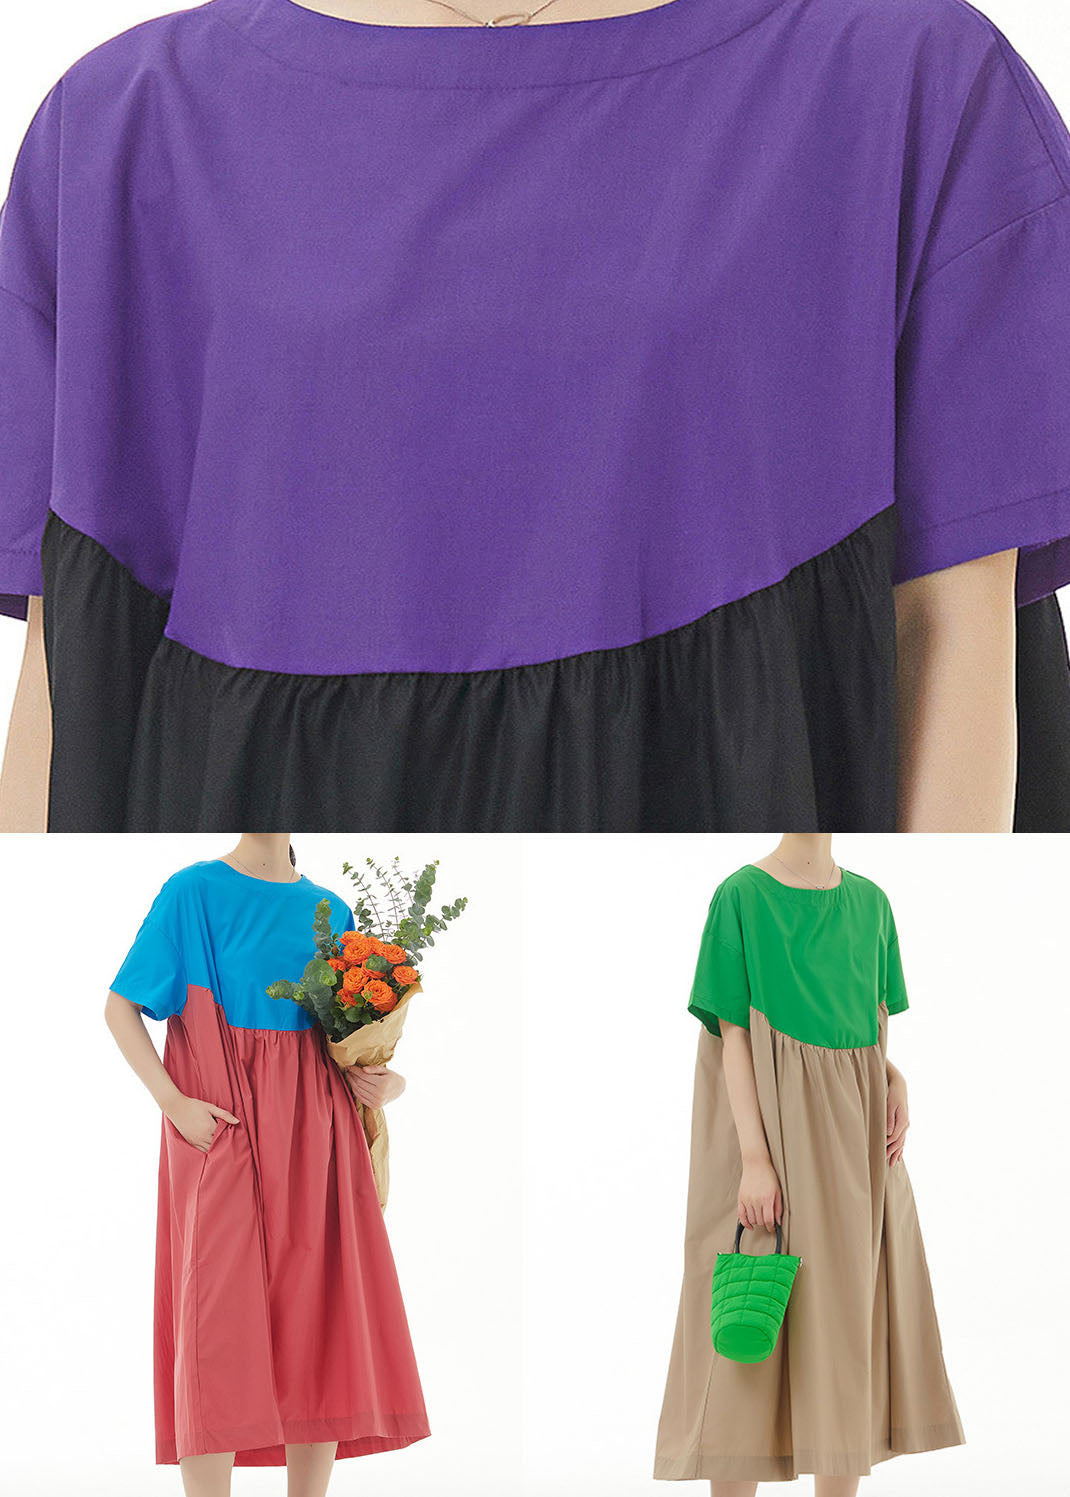 peopleterritory Simple Purple O Neck Wrinkled Patchwork Cotton Dresses Summer LY1166